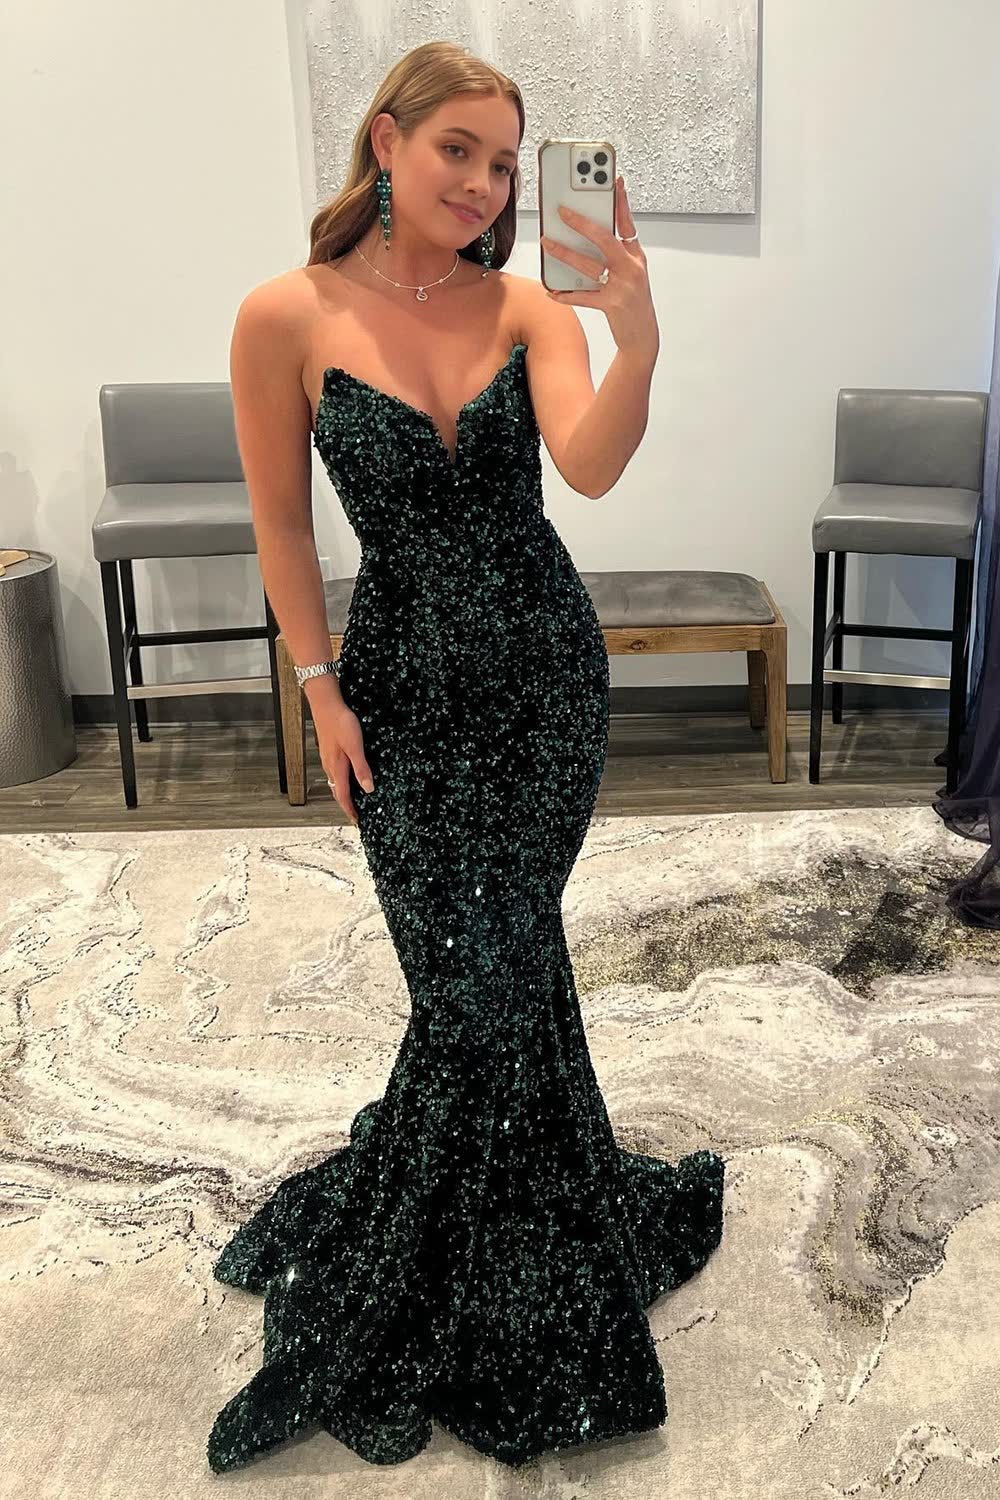 Sparkly Dark Green Sequins Mermaid Sweetheart Long Corset Prom Dress outfits, Sparkly Dark Green Sequins Mermaid Sweetheart Long Prom Dress